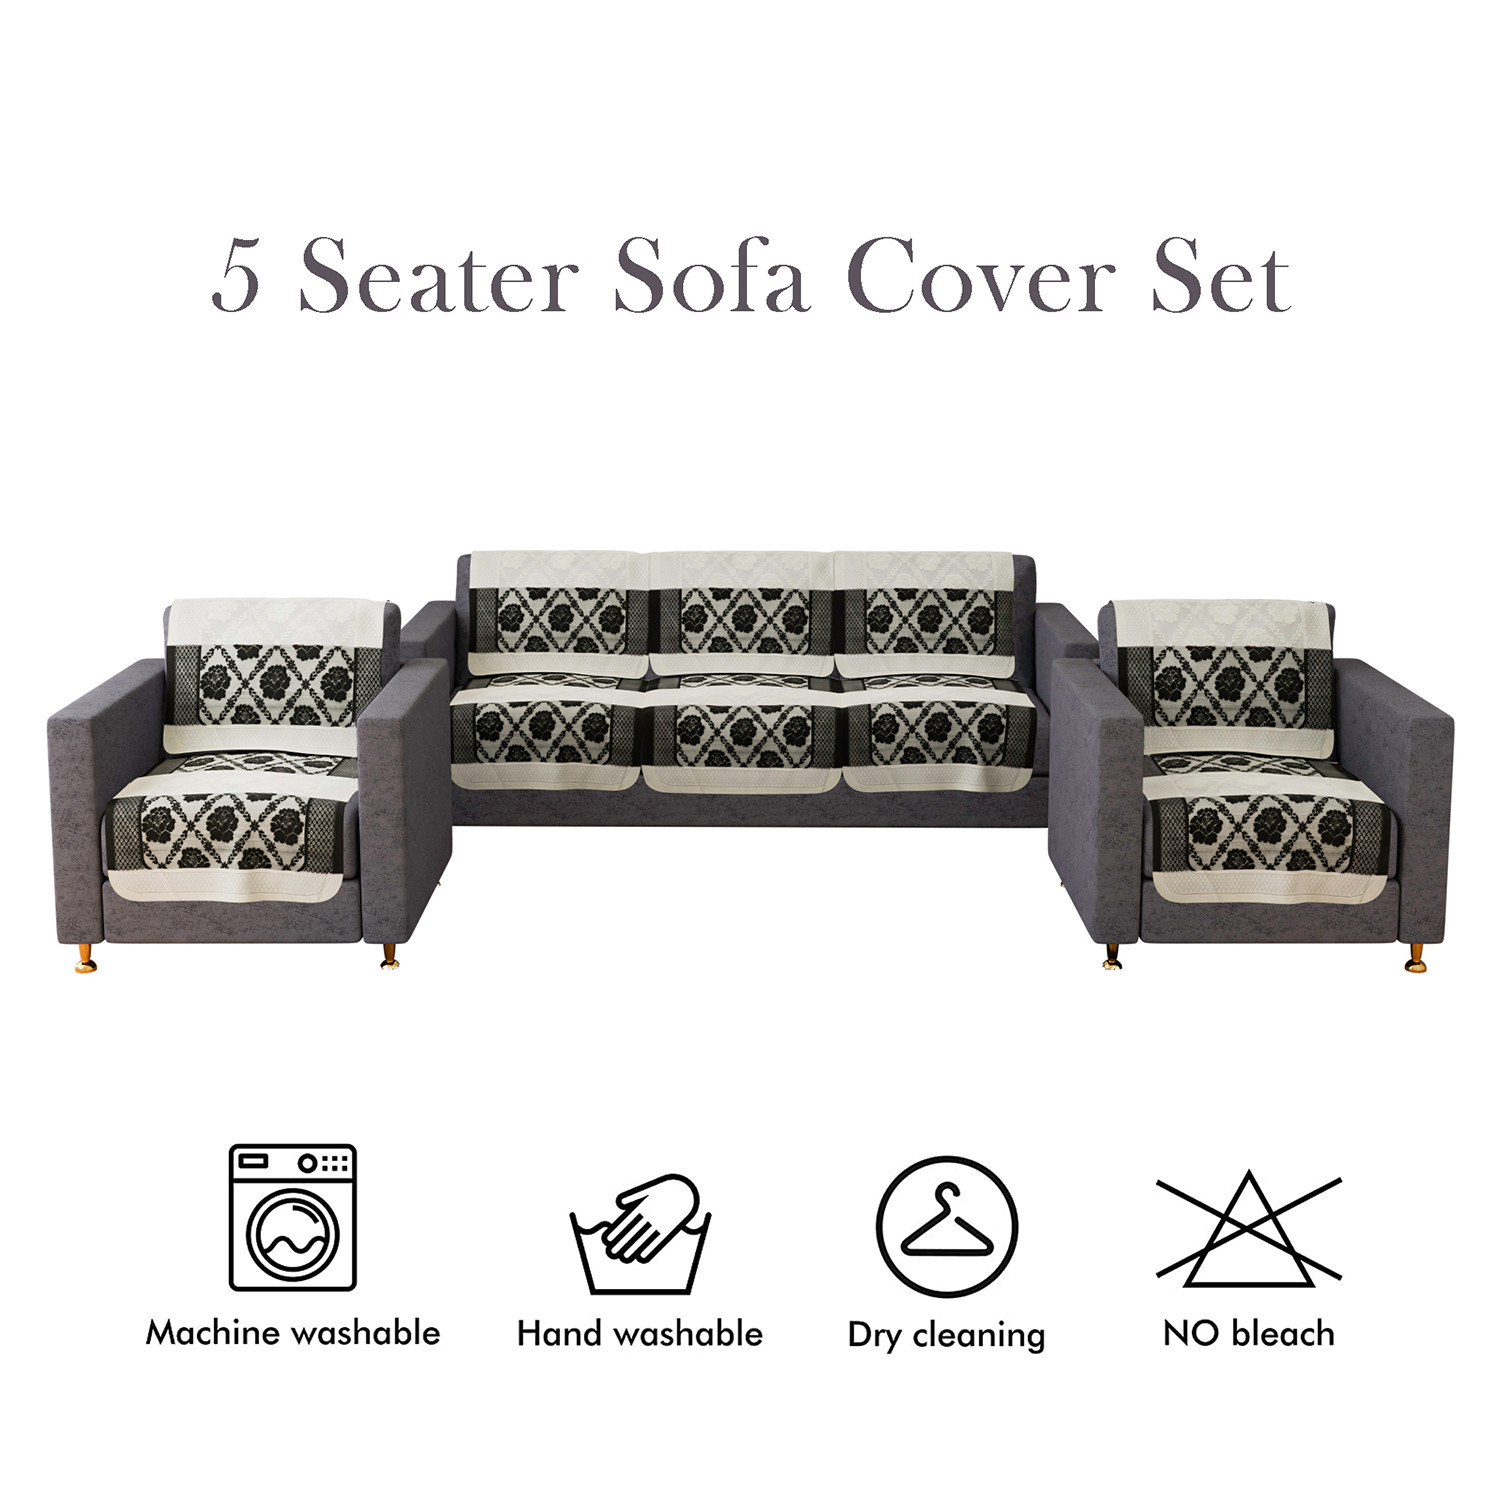 Kuber Industries Sofa Cover | Cotton Net Brown Flower Patta Sofa Cover | 5-Seater Sofa Cover for Home Decor | Sofa cover Set for Living room | Brown